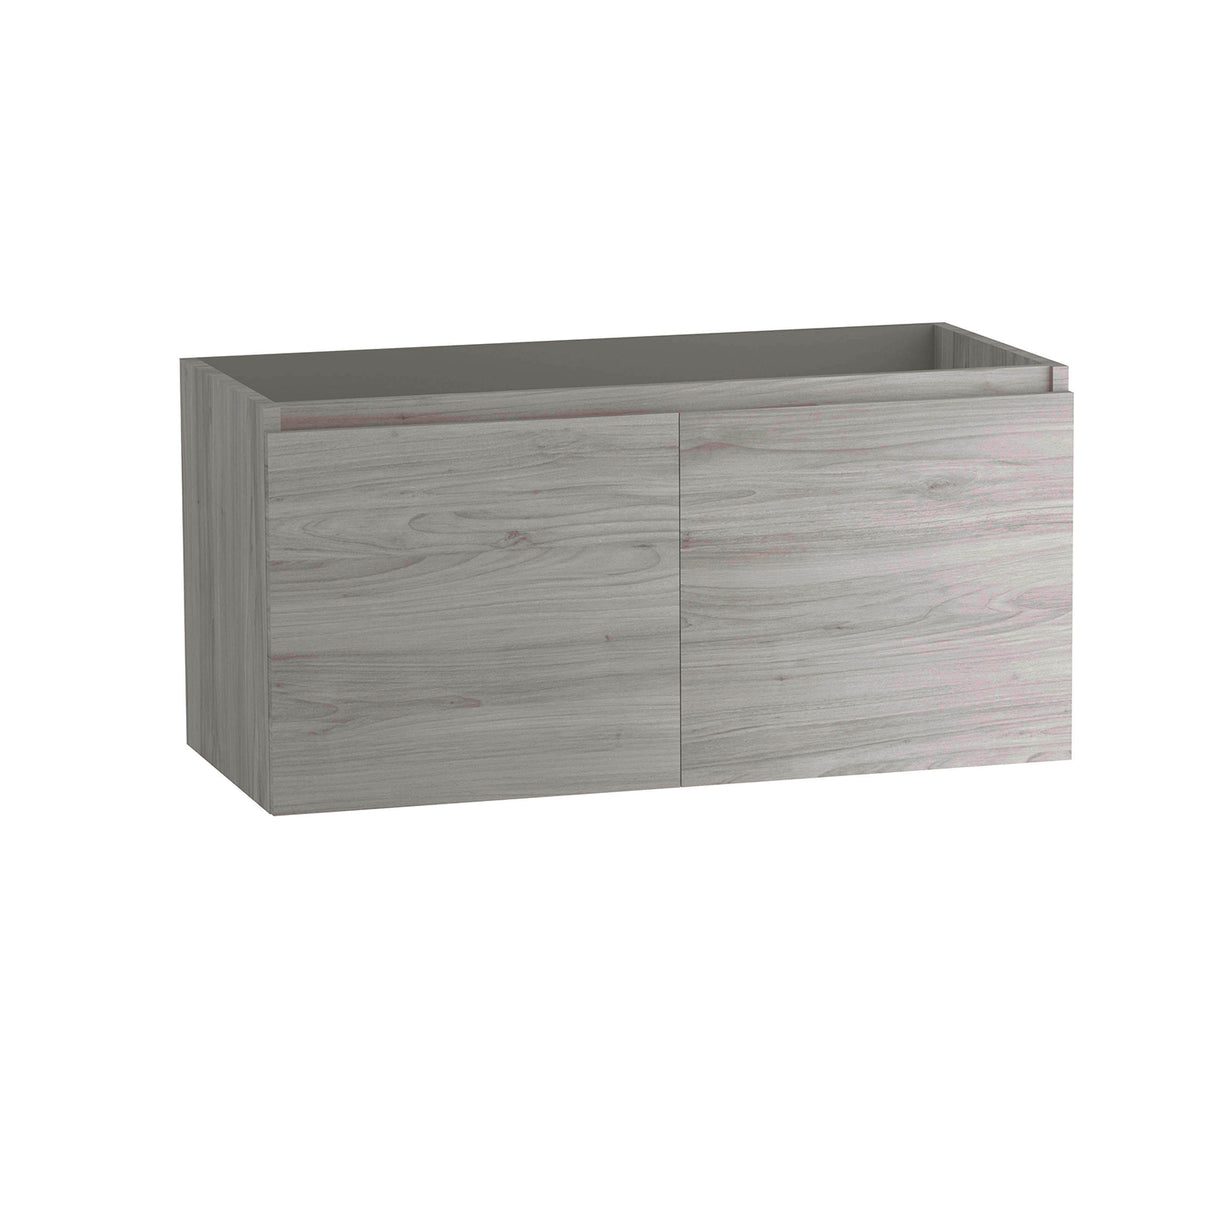 DAX Malibu Engineered Wood and Porcelain Onix Basin with Double Vanity Cabinet, 48", Cement DAX-MAL014881-ONX